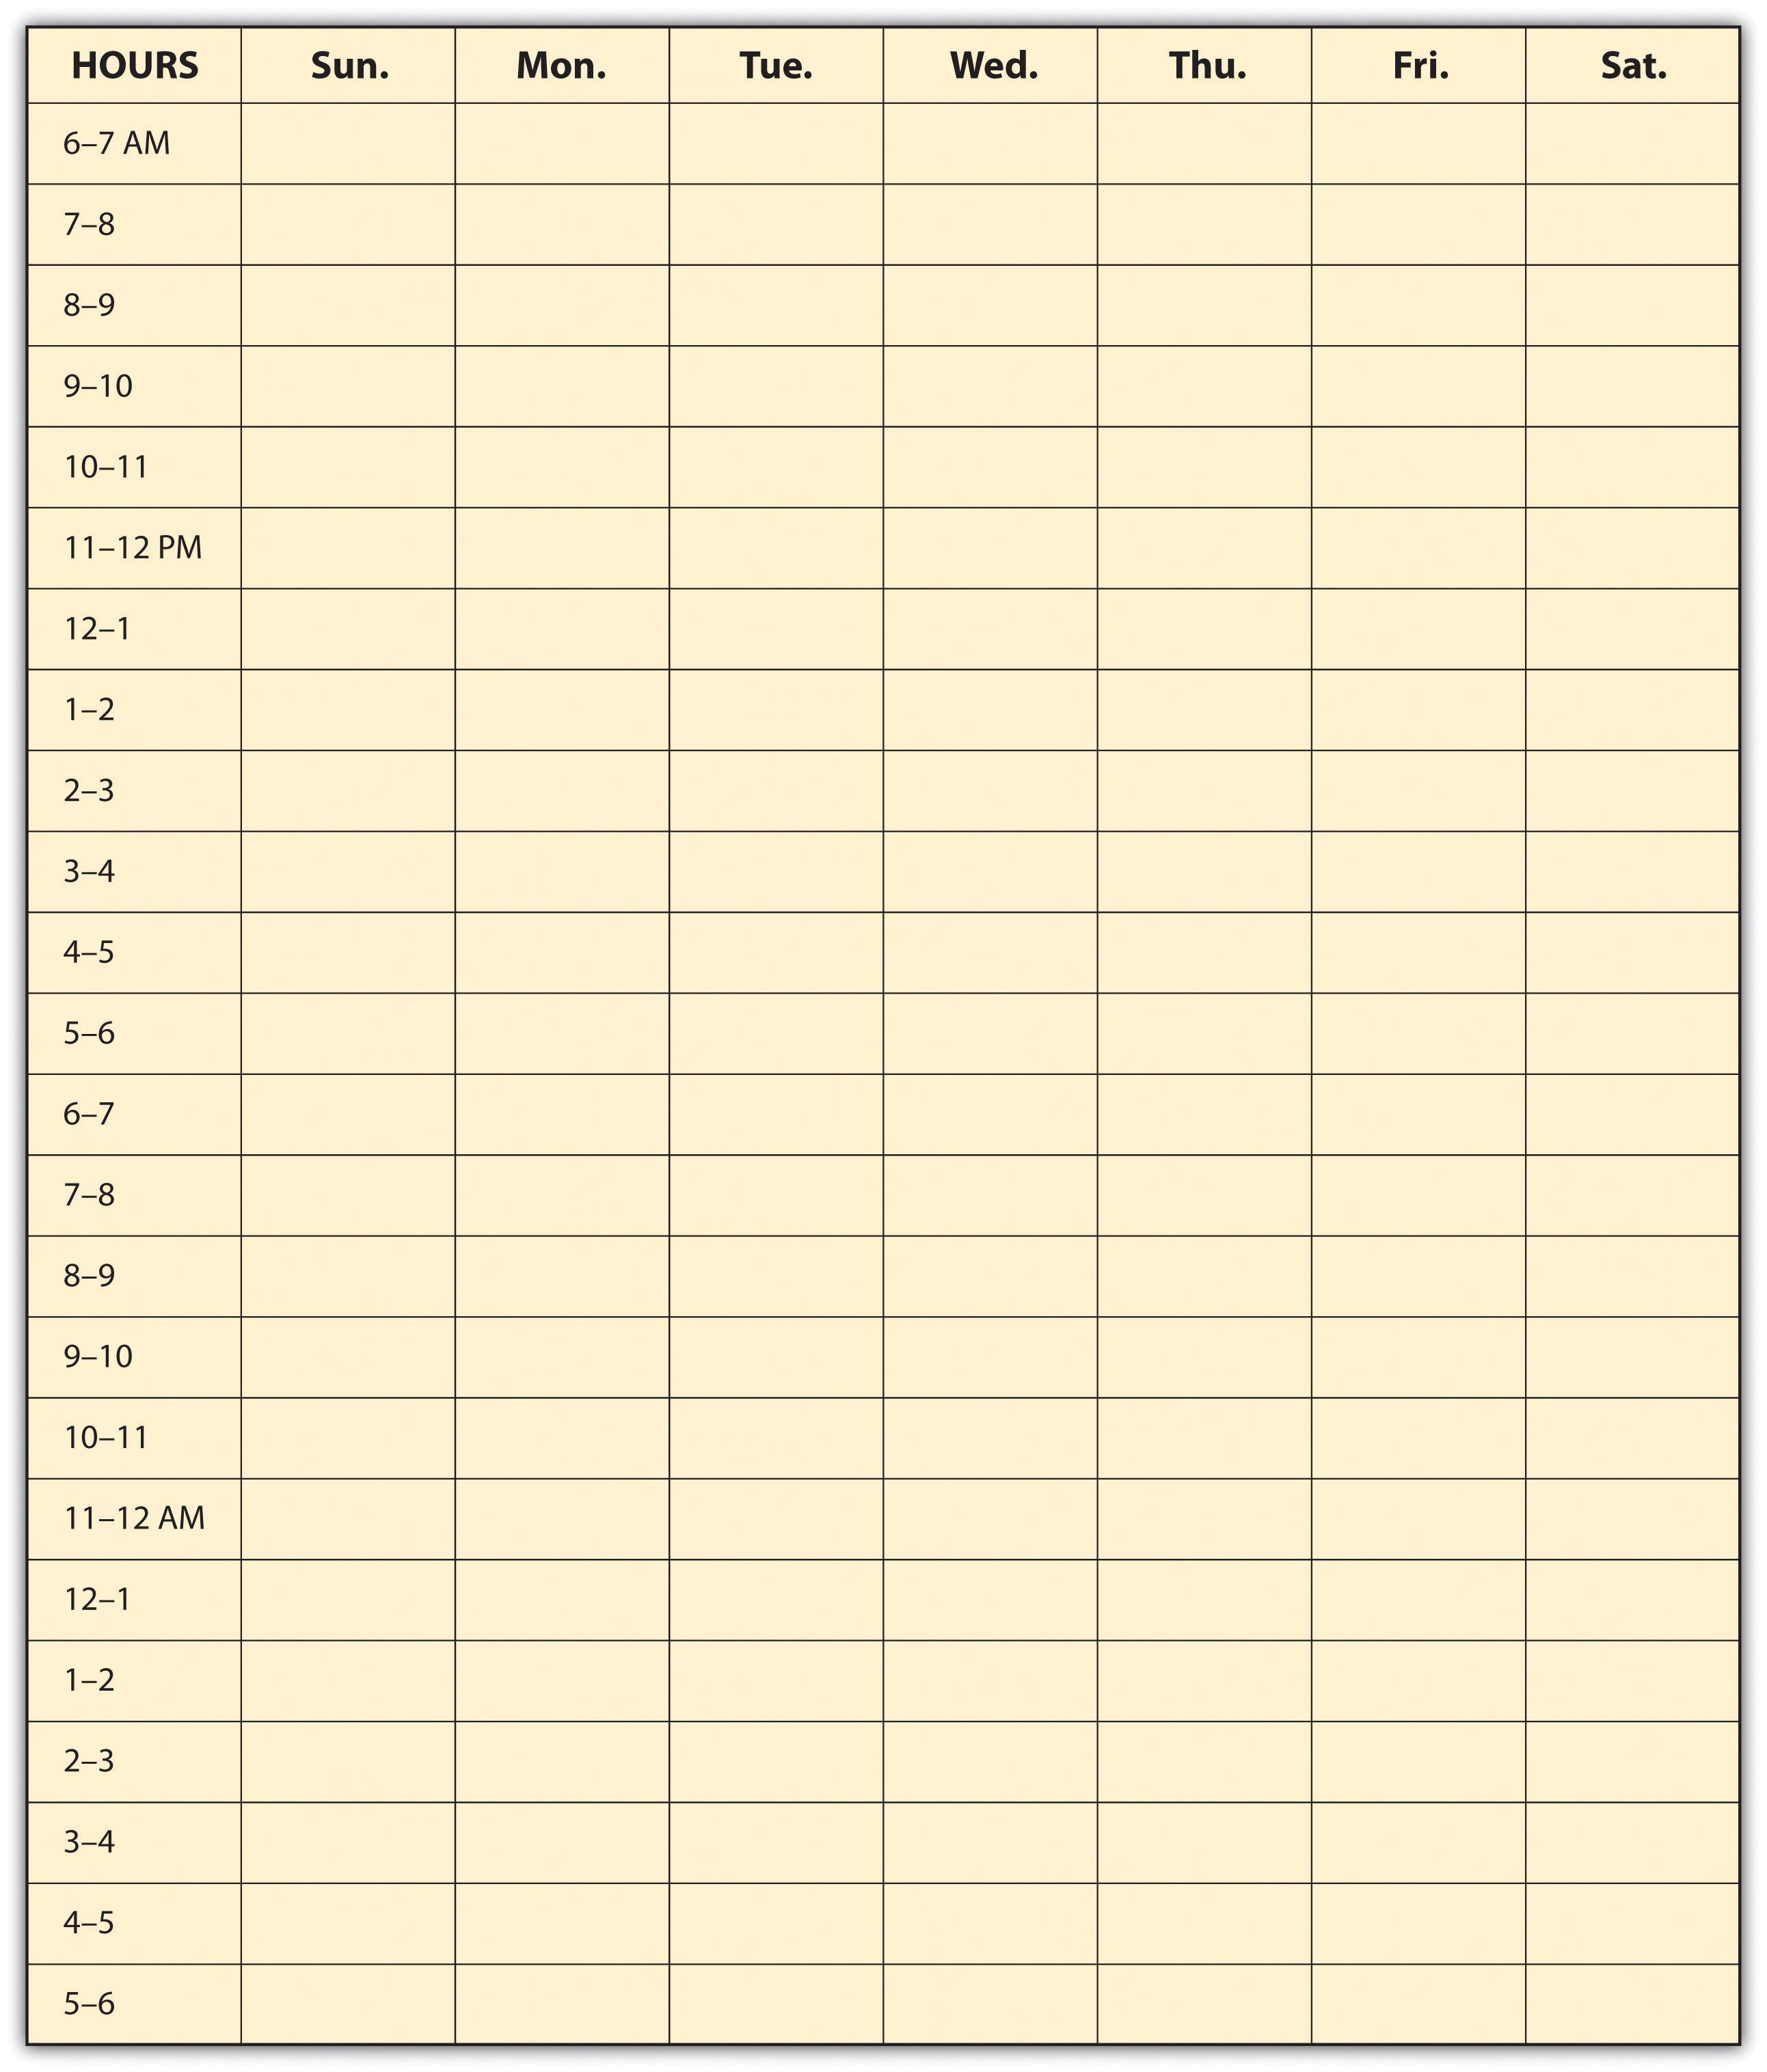 Day Planner With Time Slots Printable Weekly Calendar With throughout Day Calendar With Time Slots